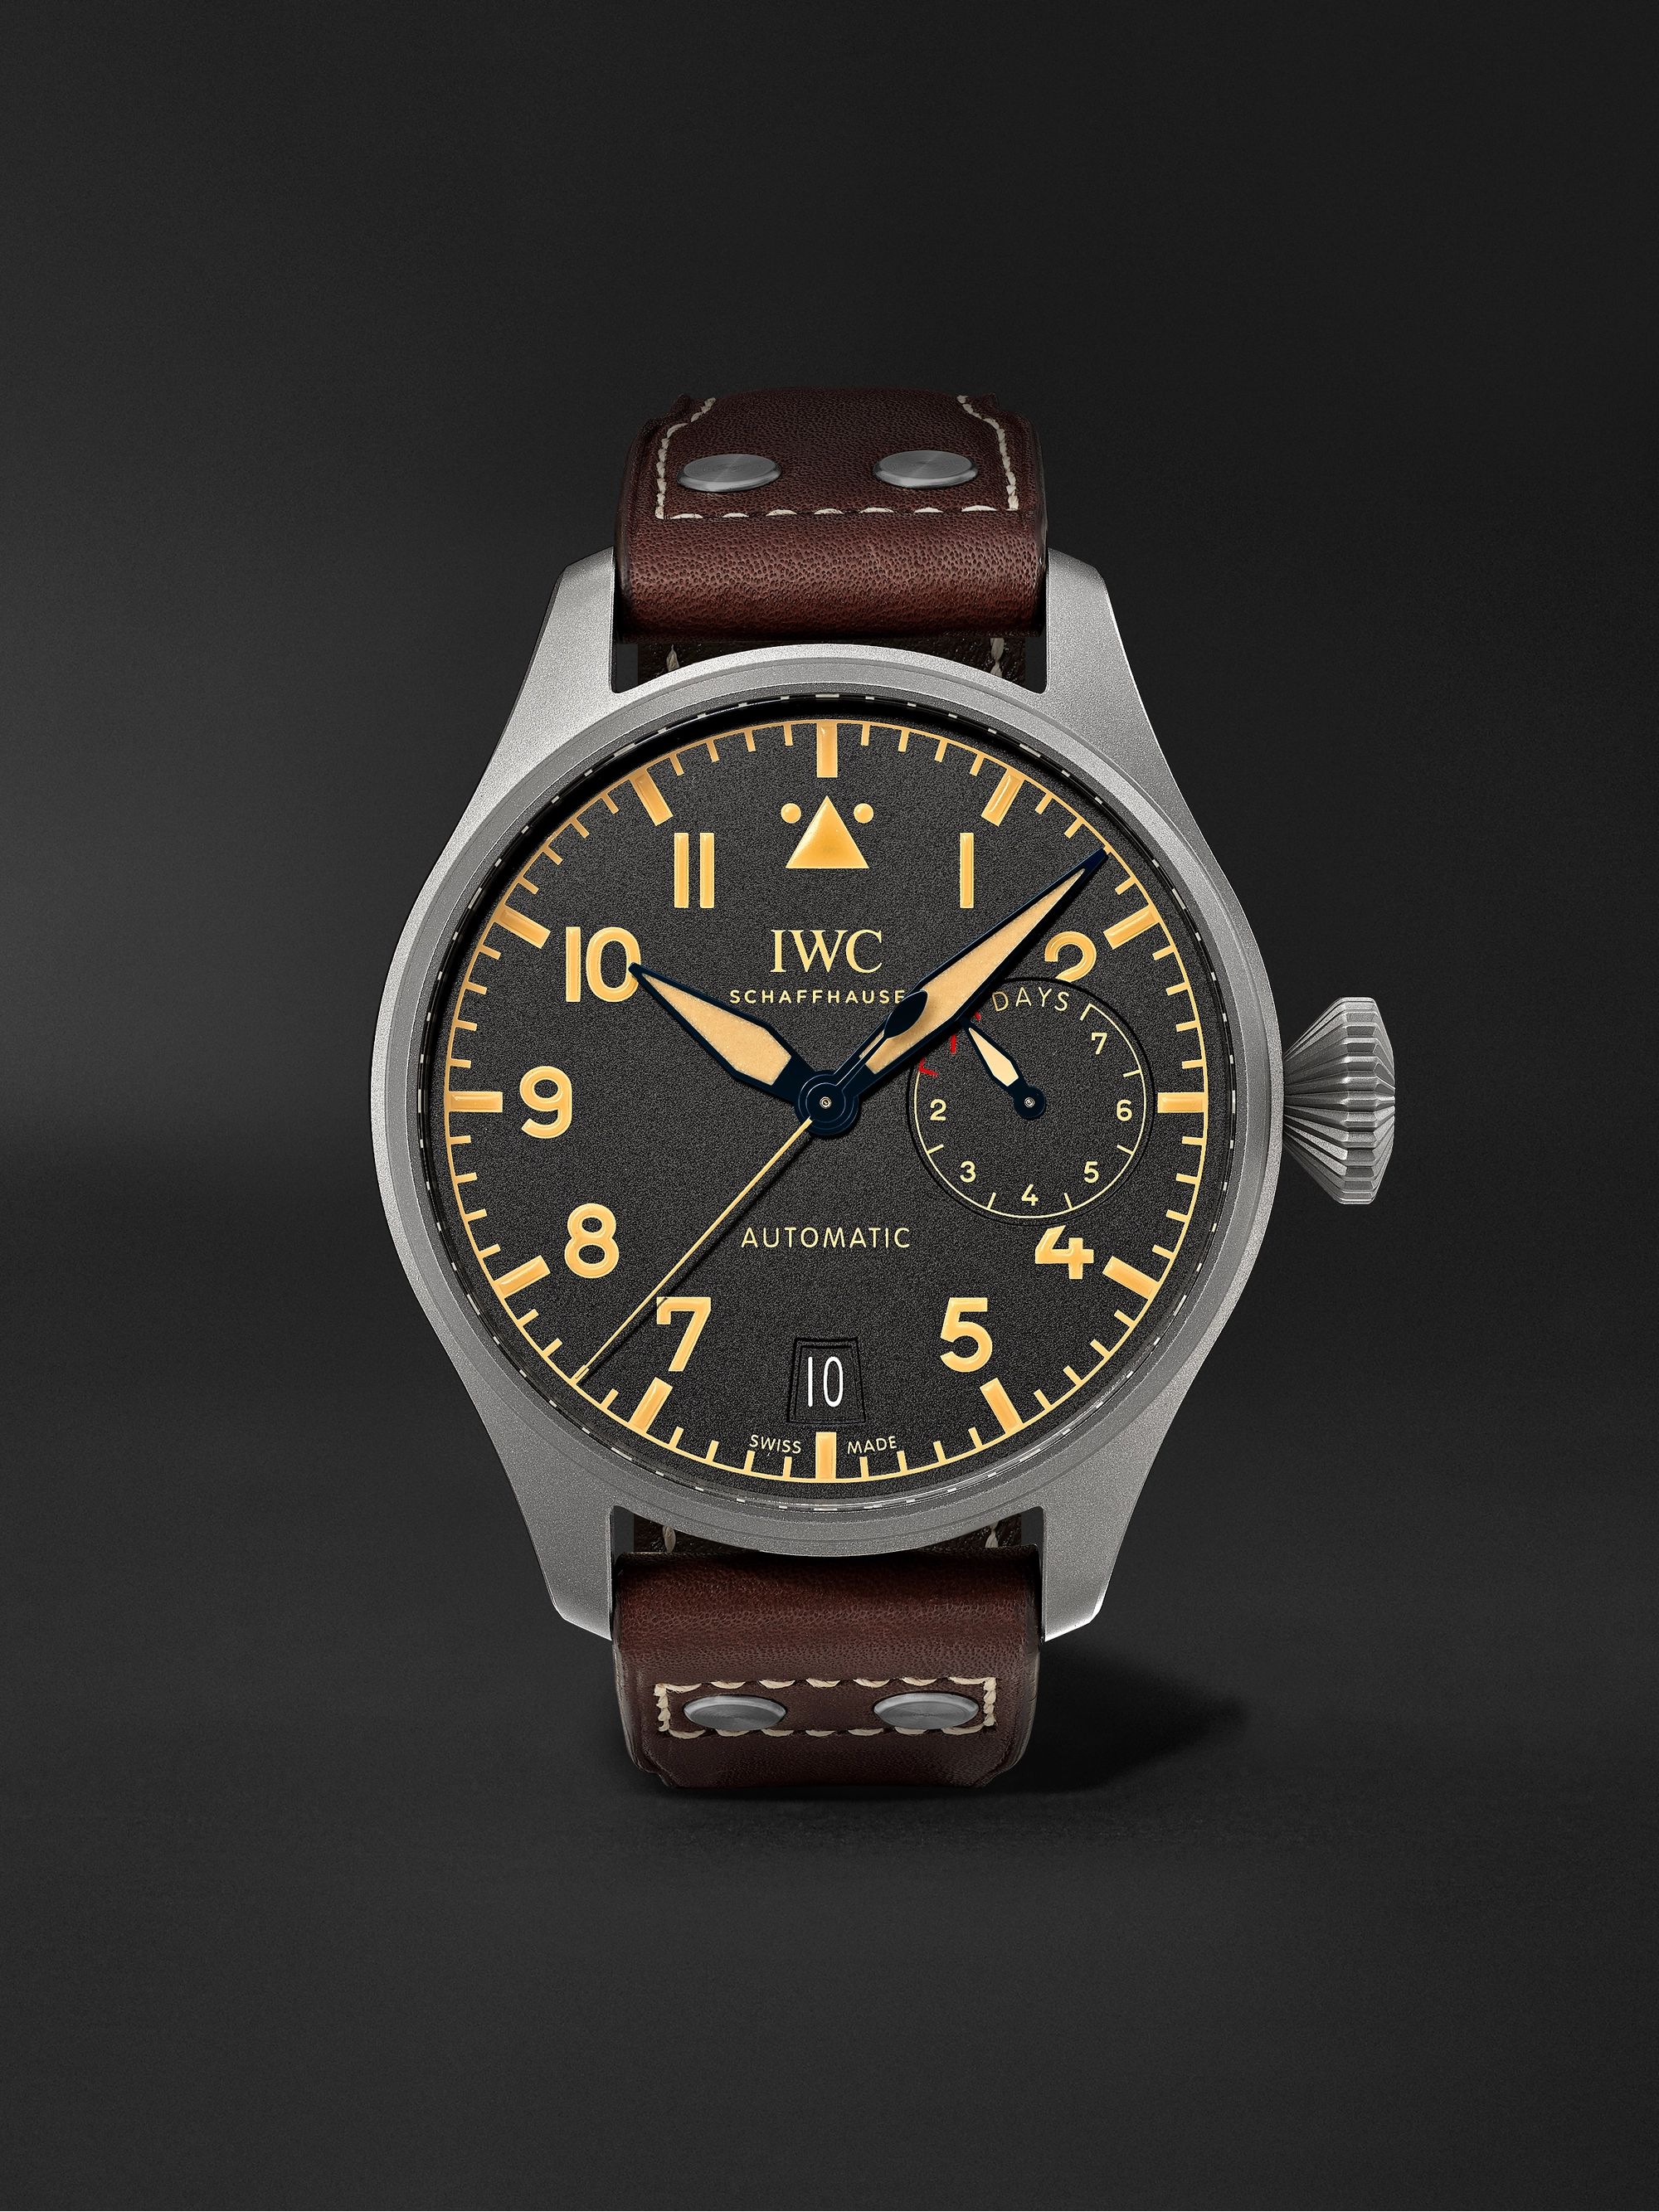 IWC SCHAFFHAUSEN Big Pilot's Heritage Automatic 46.2mm Titanium and Leather Watch, Ref. No. IW501004